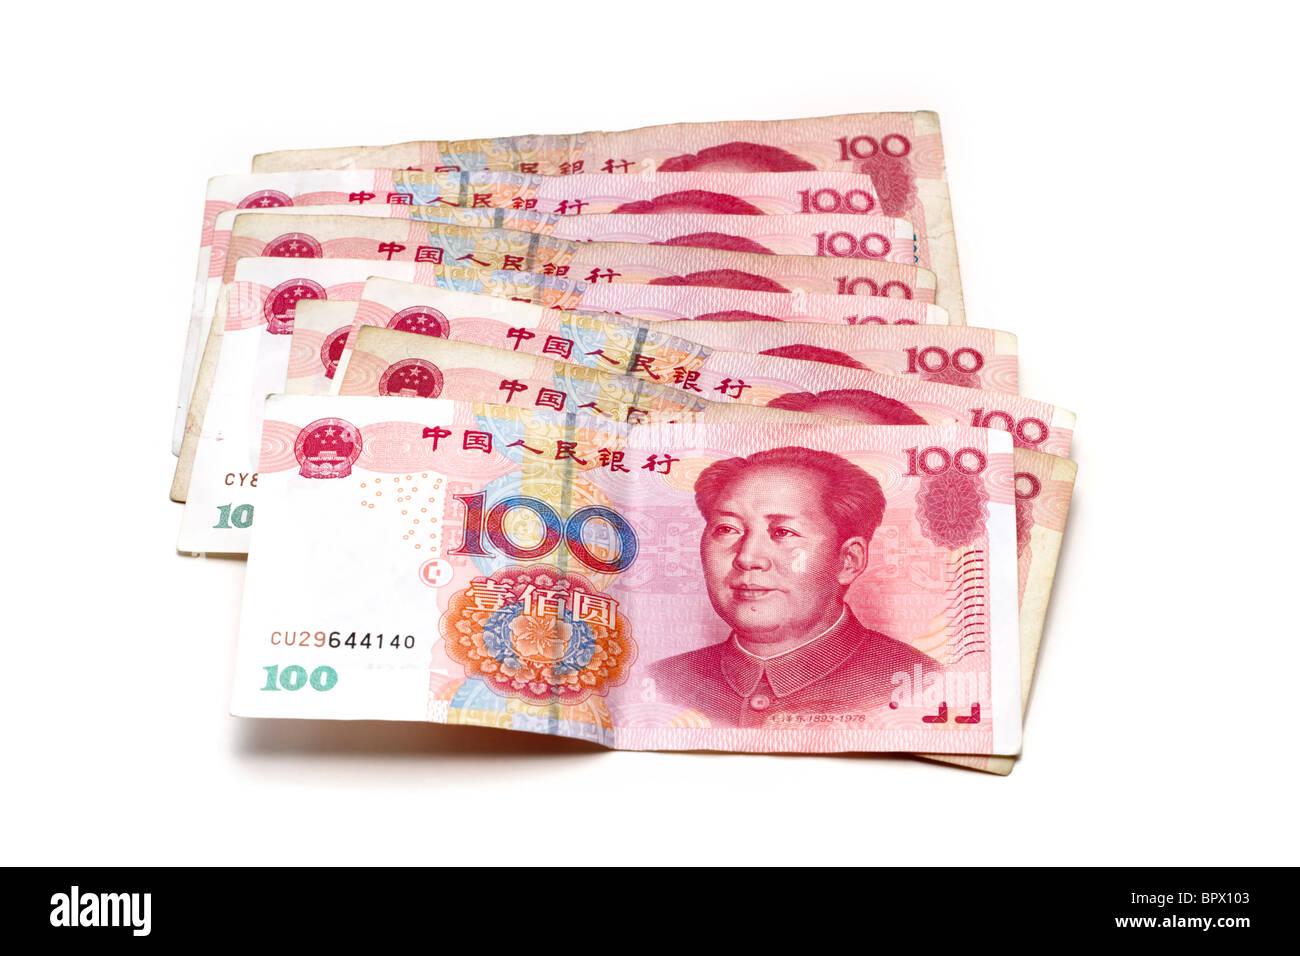 Chinese One Hundred Yuan notes on a white background Stock Photo